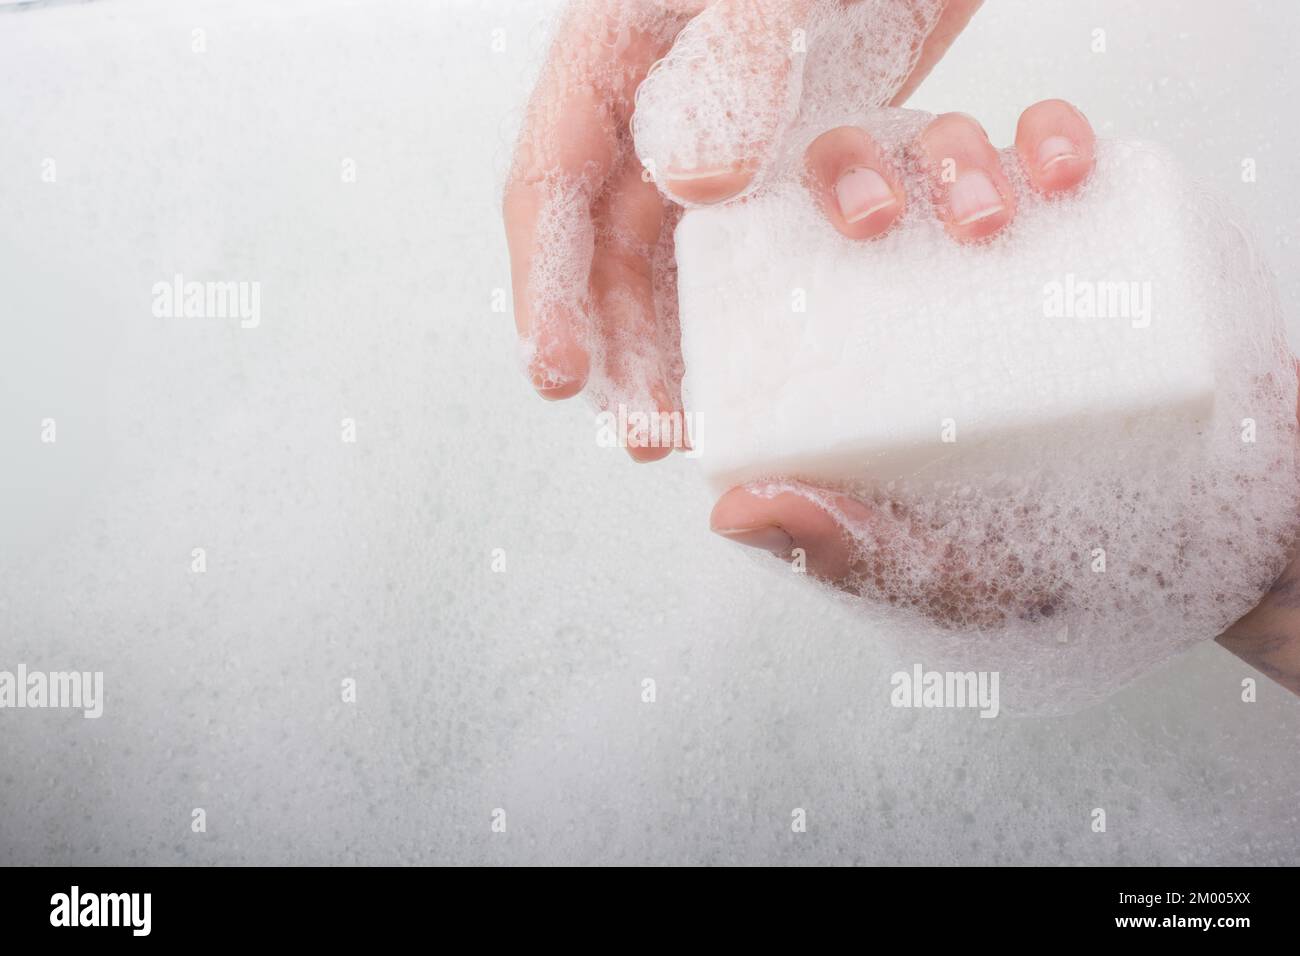 Hand washing and soap foam on a foamy background Stock Photo